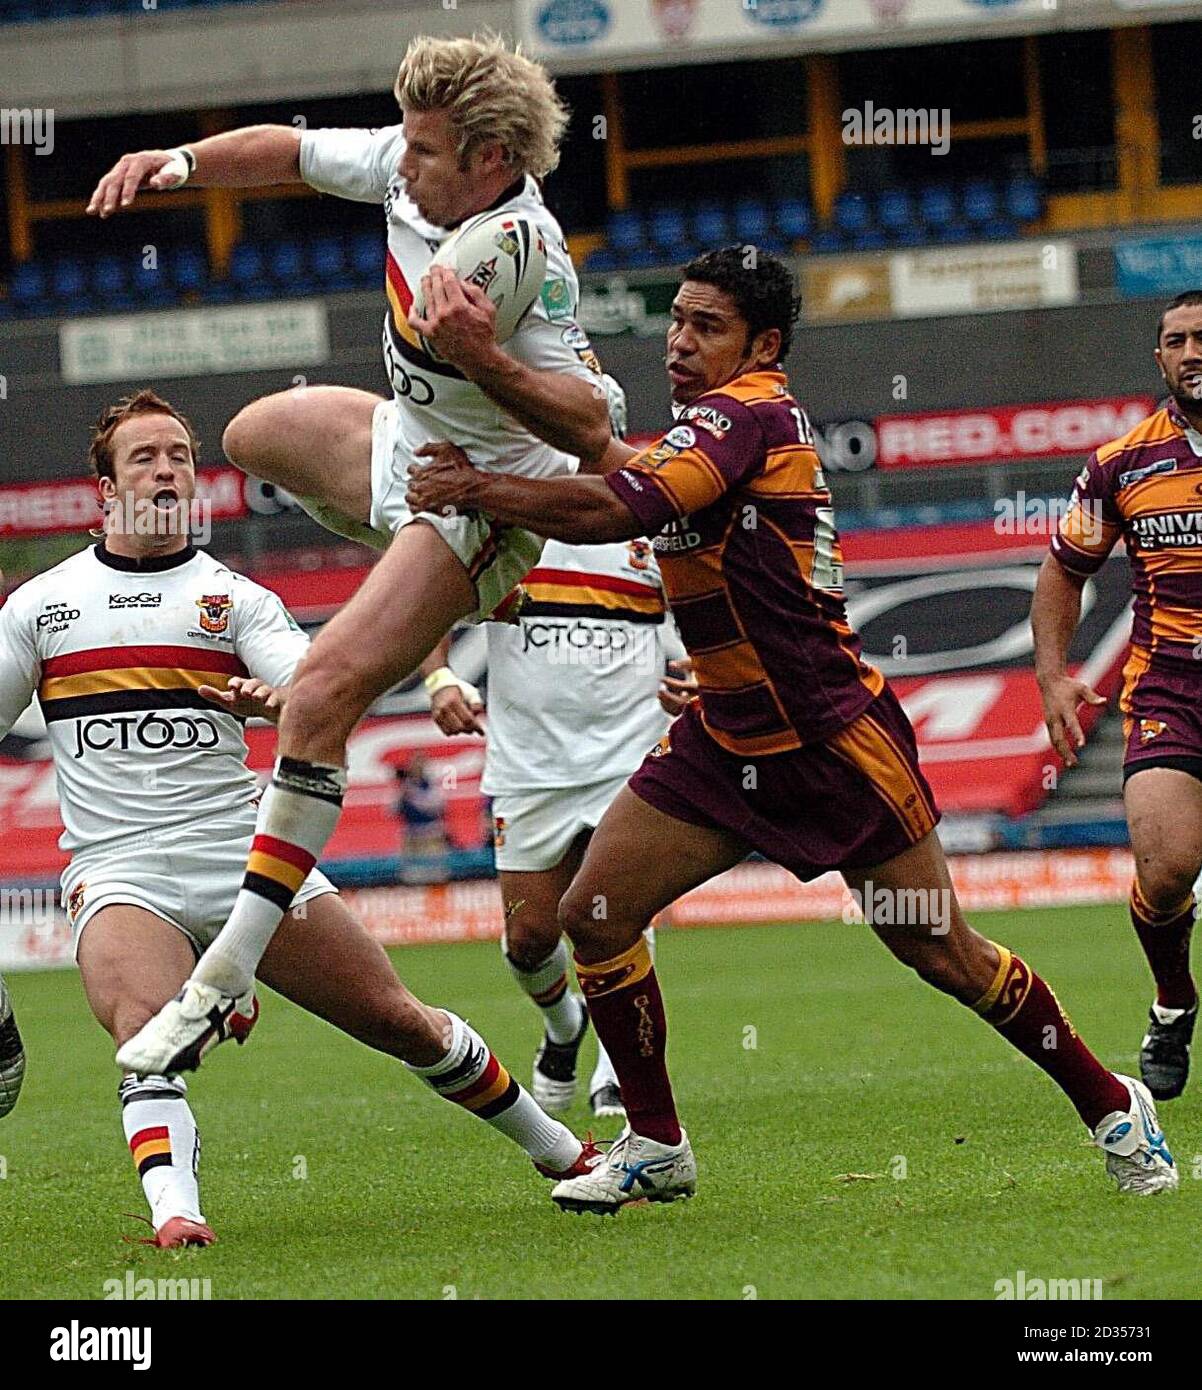 Bradford Bulls' Glenn Morrison catches the ball mid air under pressure from Huddersfield Giants' Rod Jensen during the Engage Super League match at the Galpharm Stadium, Huddersfield. Stock Photo